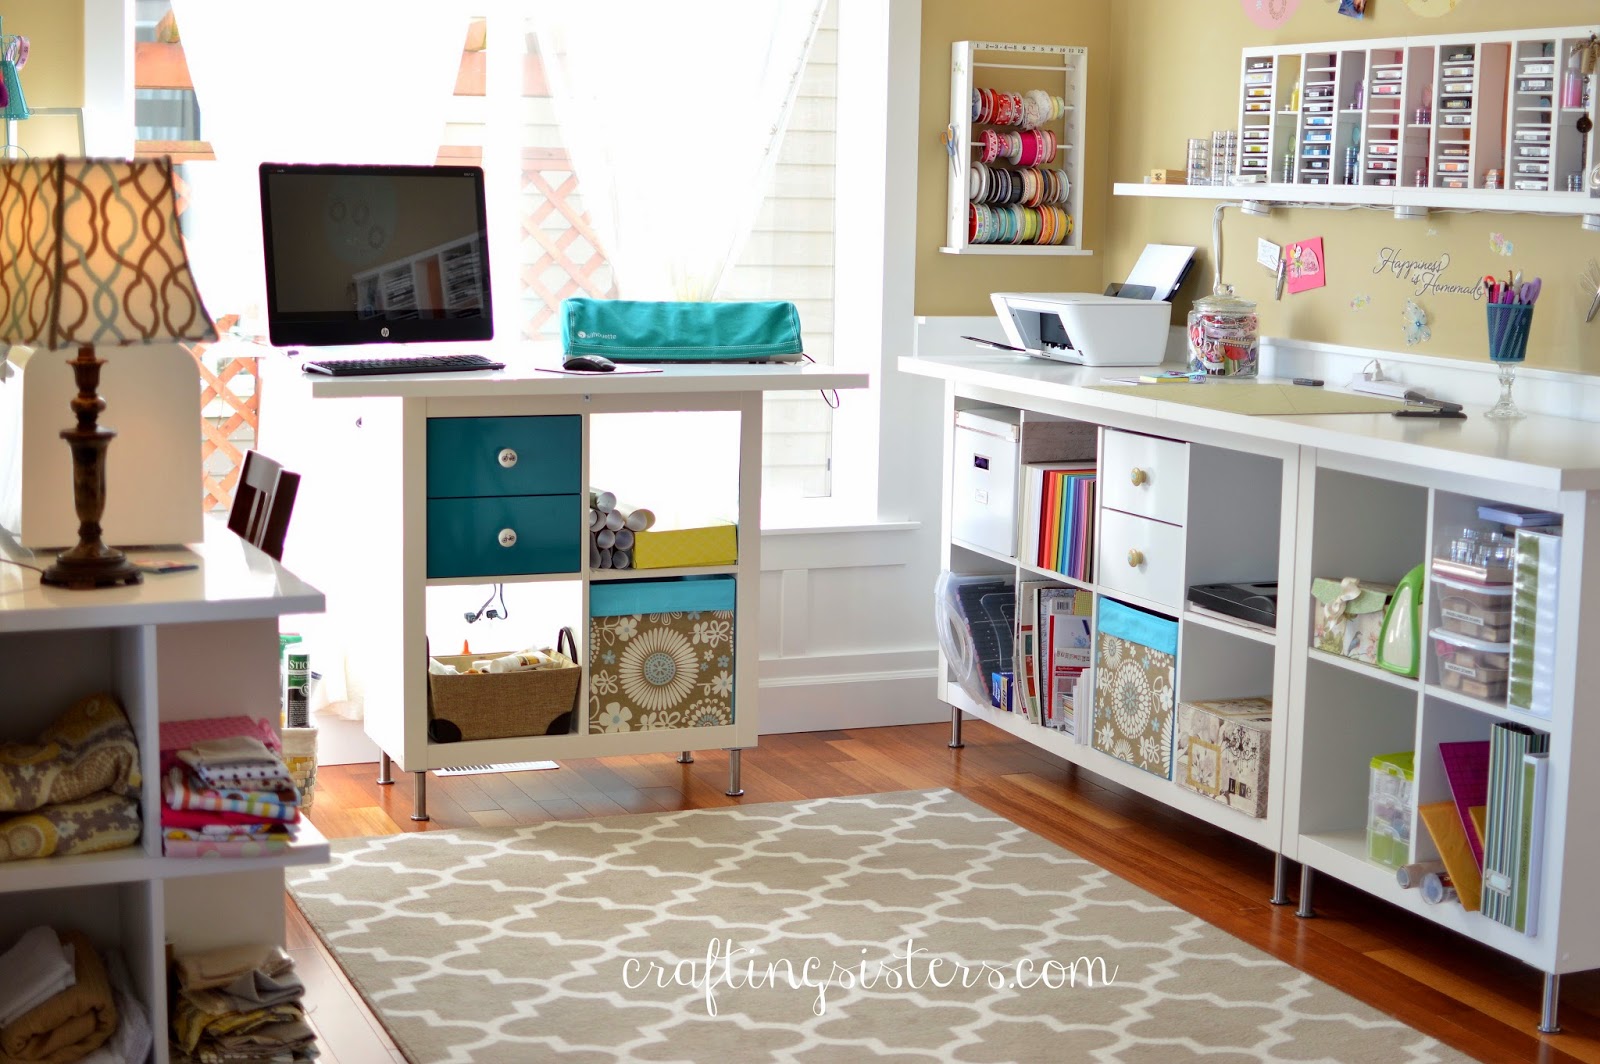 Crafting Sisters: DIY - Dining Room to Craft Room